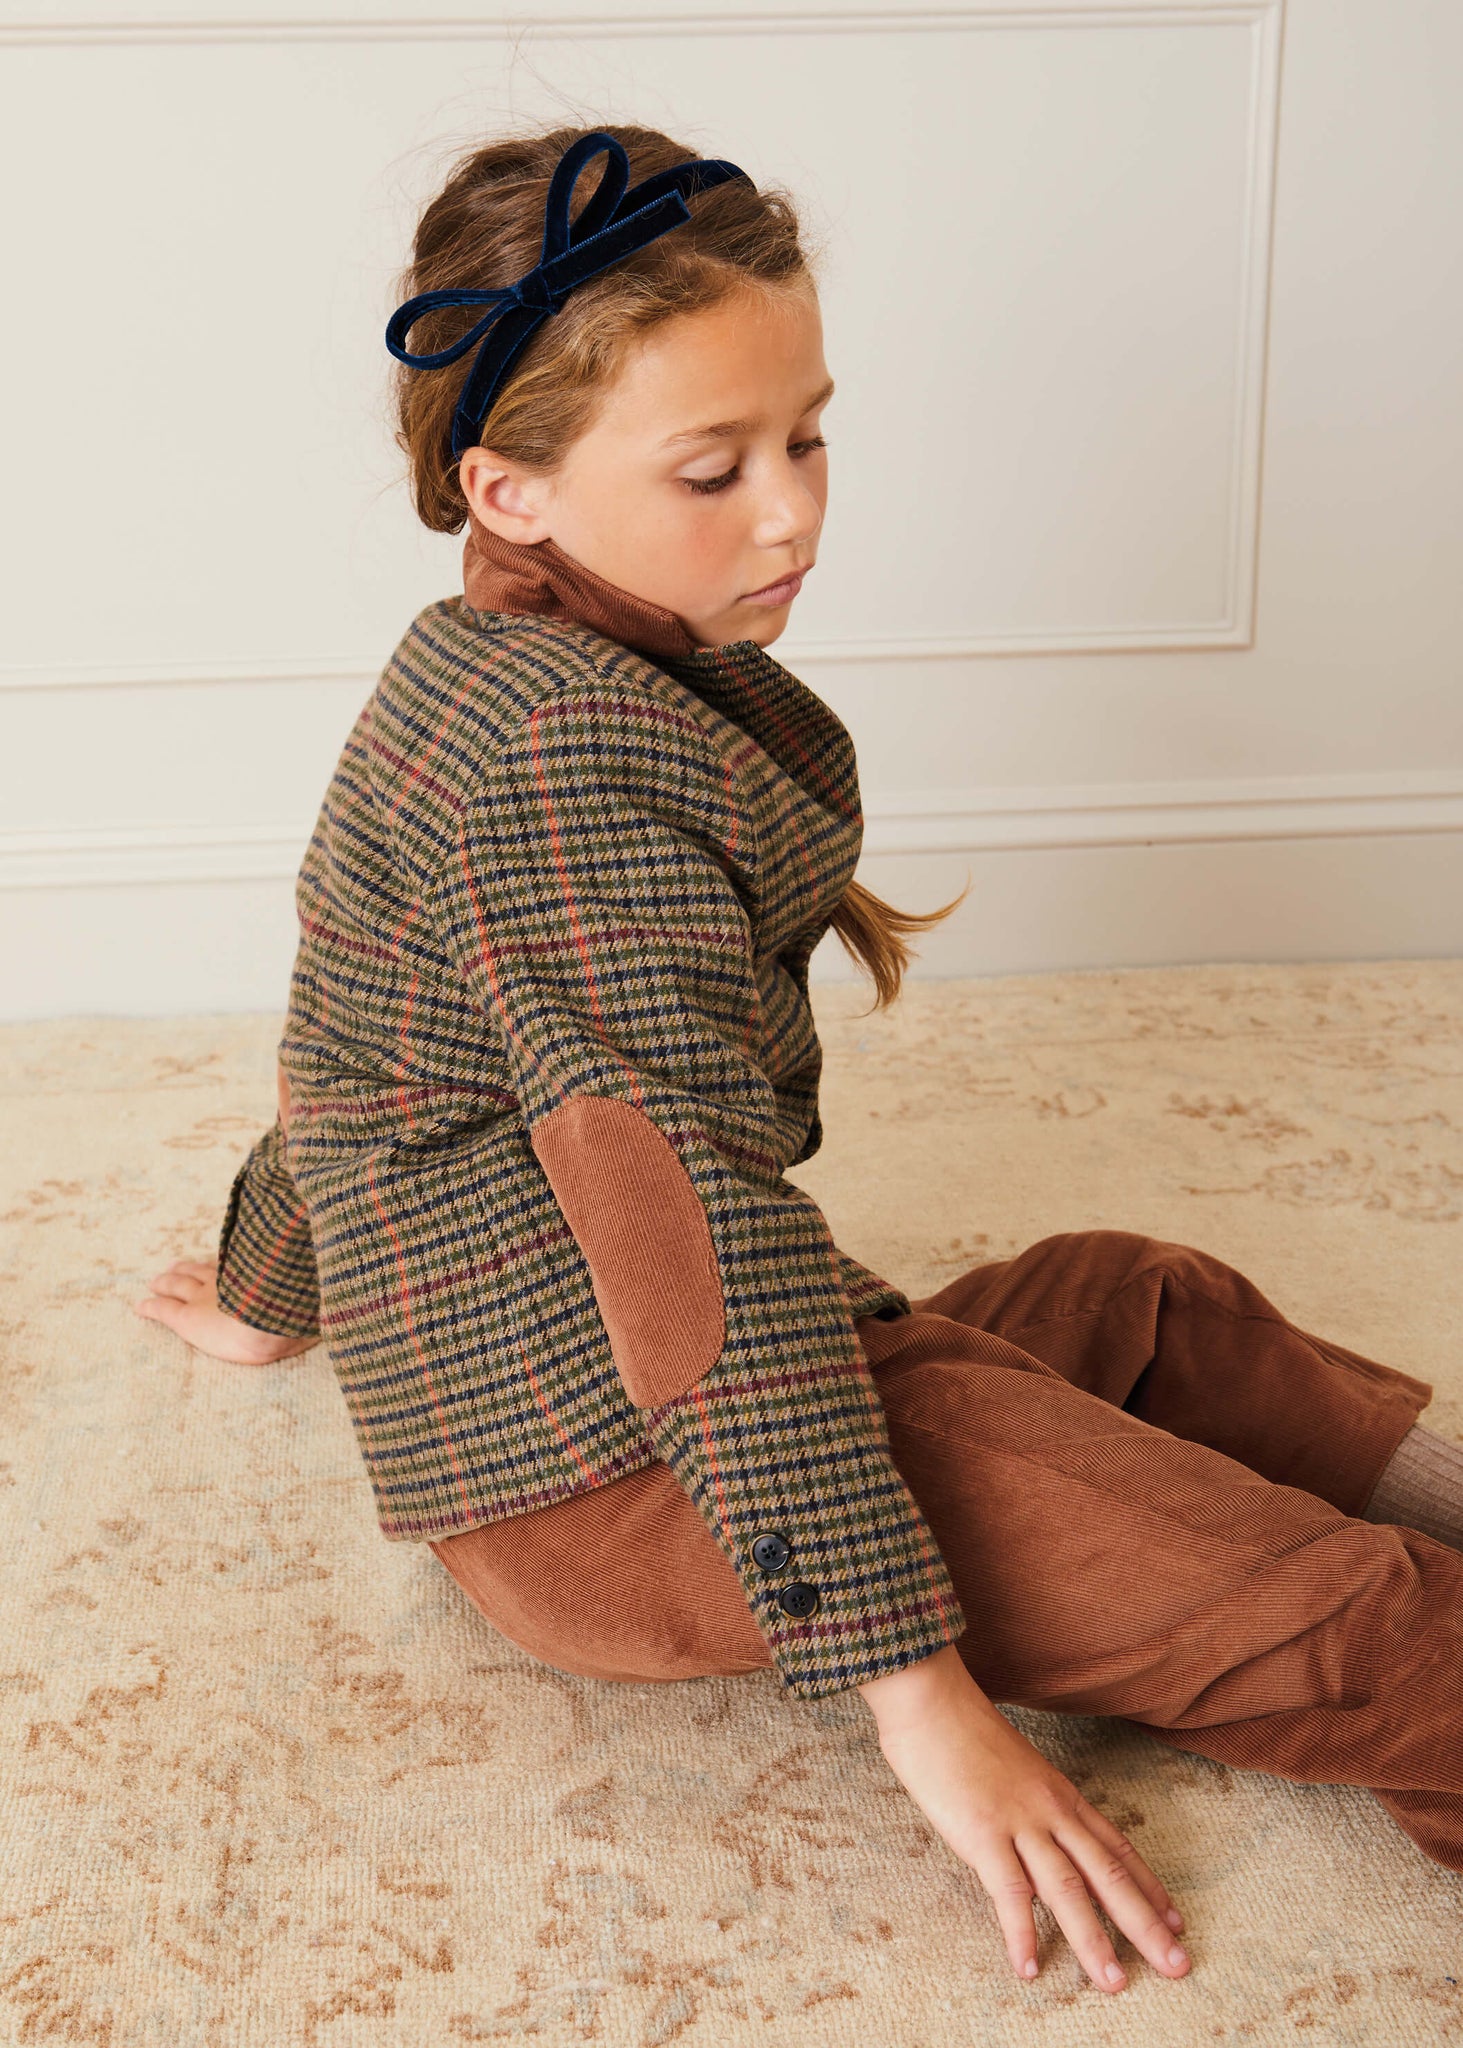 Check Tweed Three Button Blazer Jacket In Brown (4-10yrs) COATS  from Pepa London